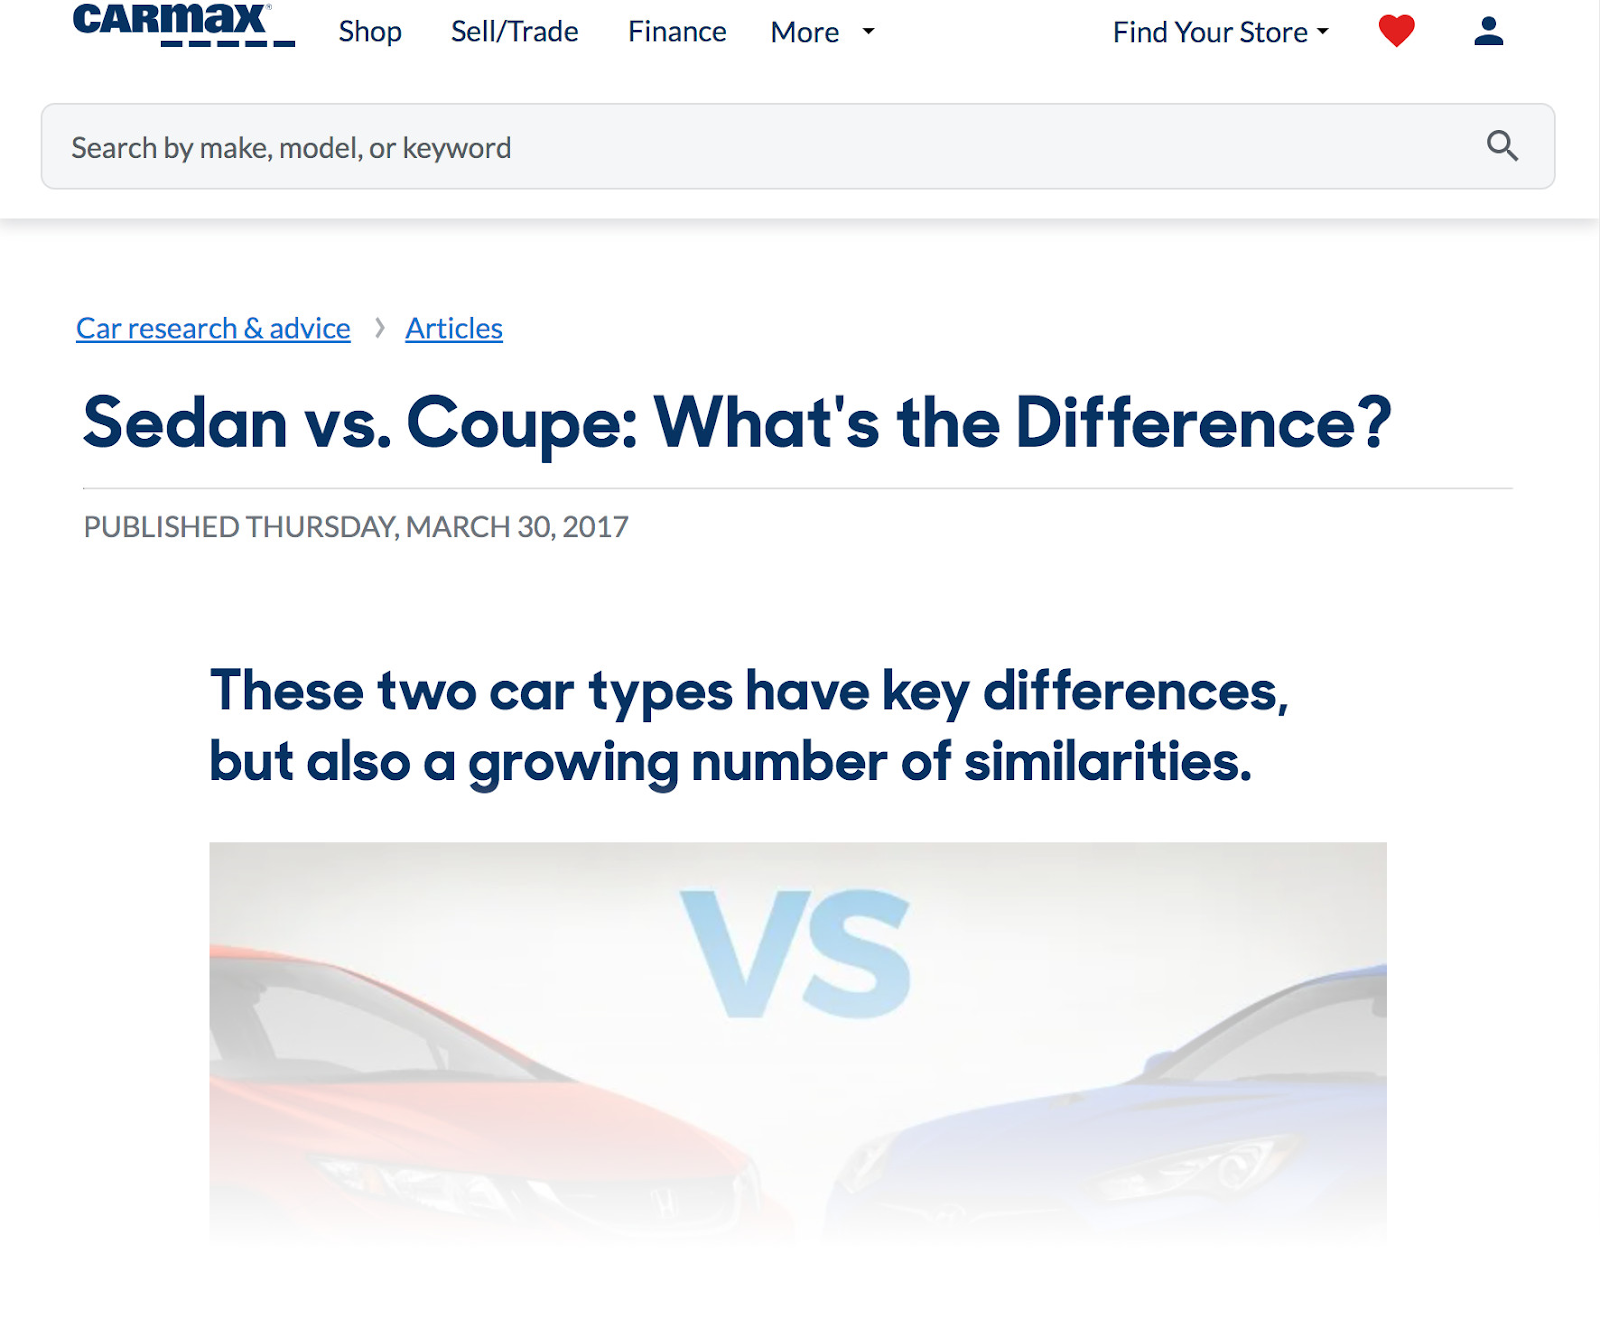 screenshot of the article: "Sedan vs. Coupe: What’s the Difference?"